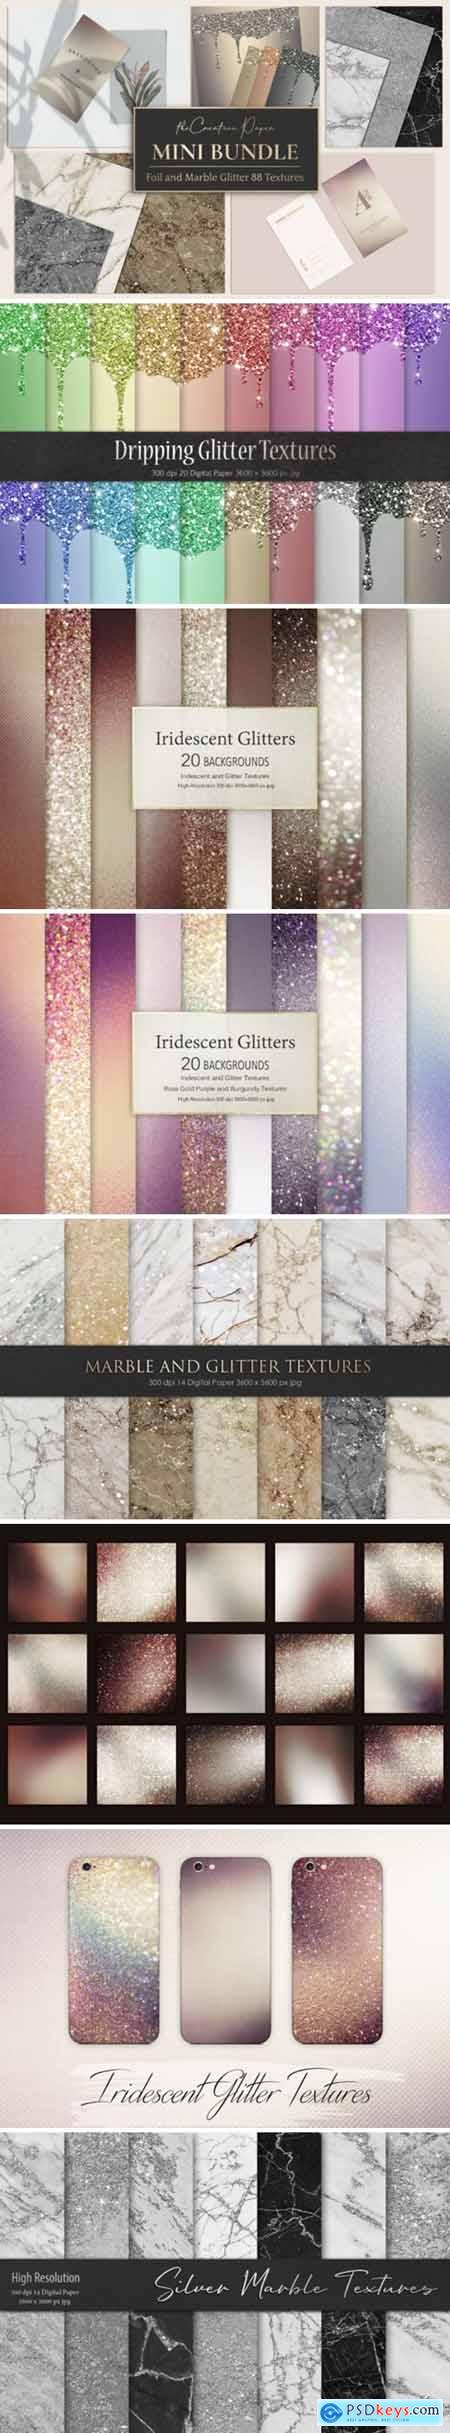 Rose Gold Foil & Marble Glitter Textures 2138222